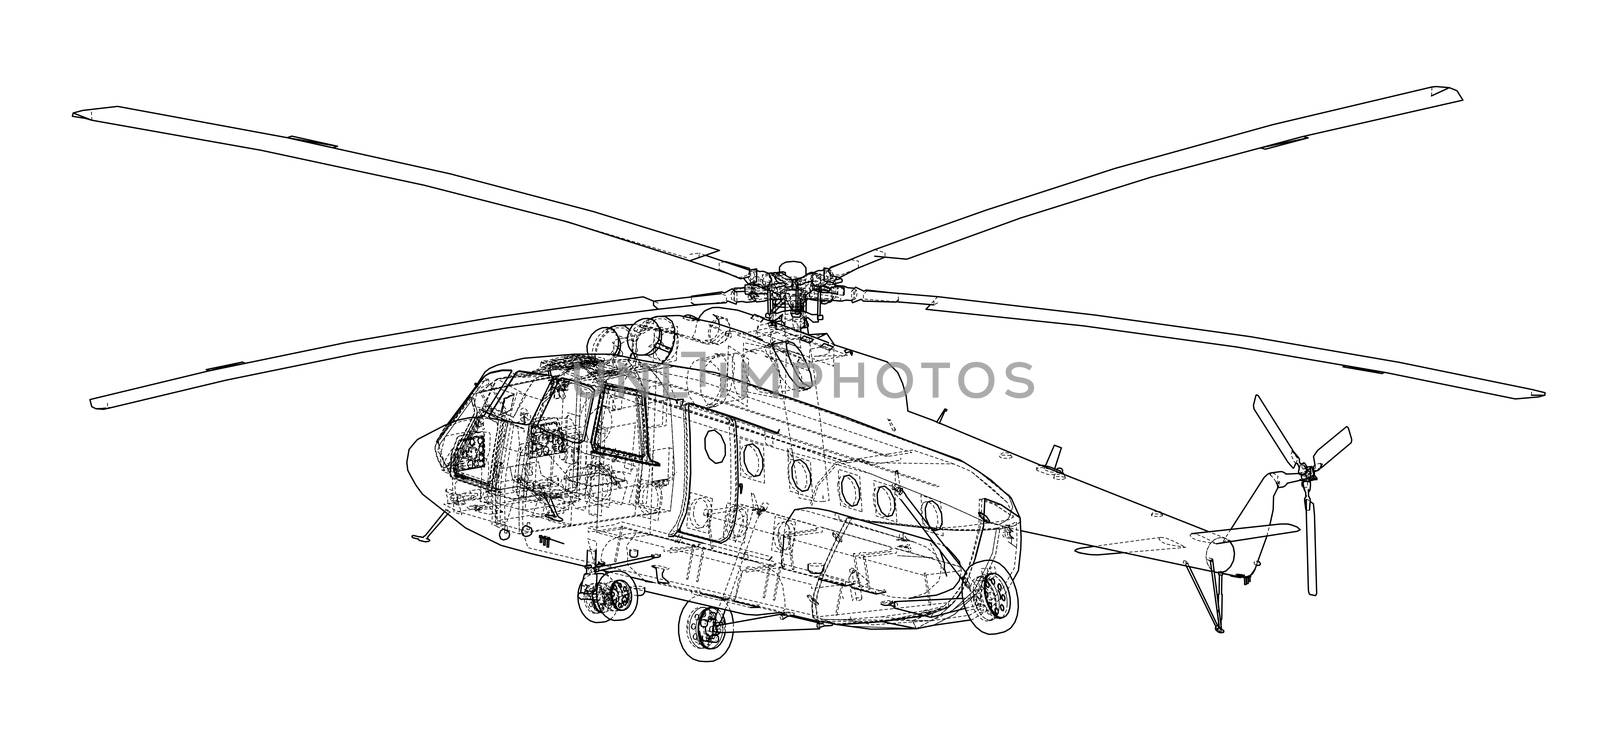 Engineering drawing of helicopter by cherezoff